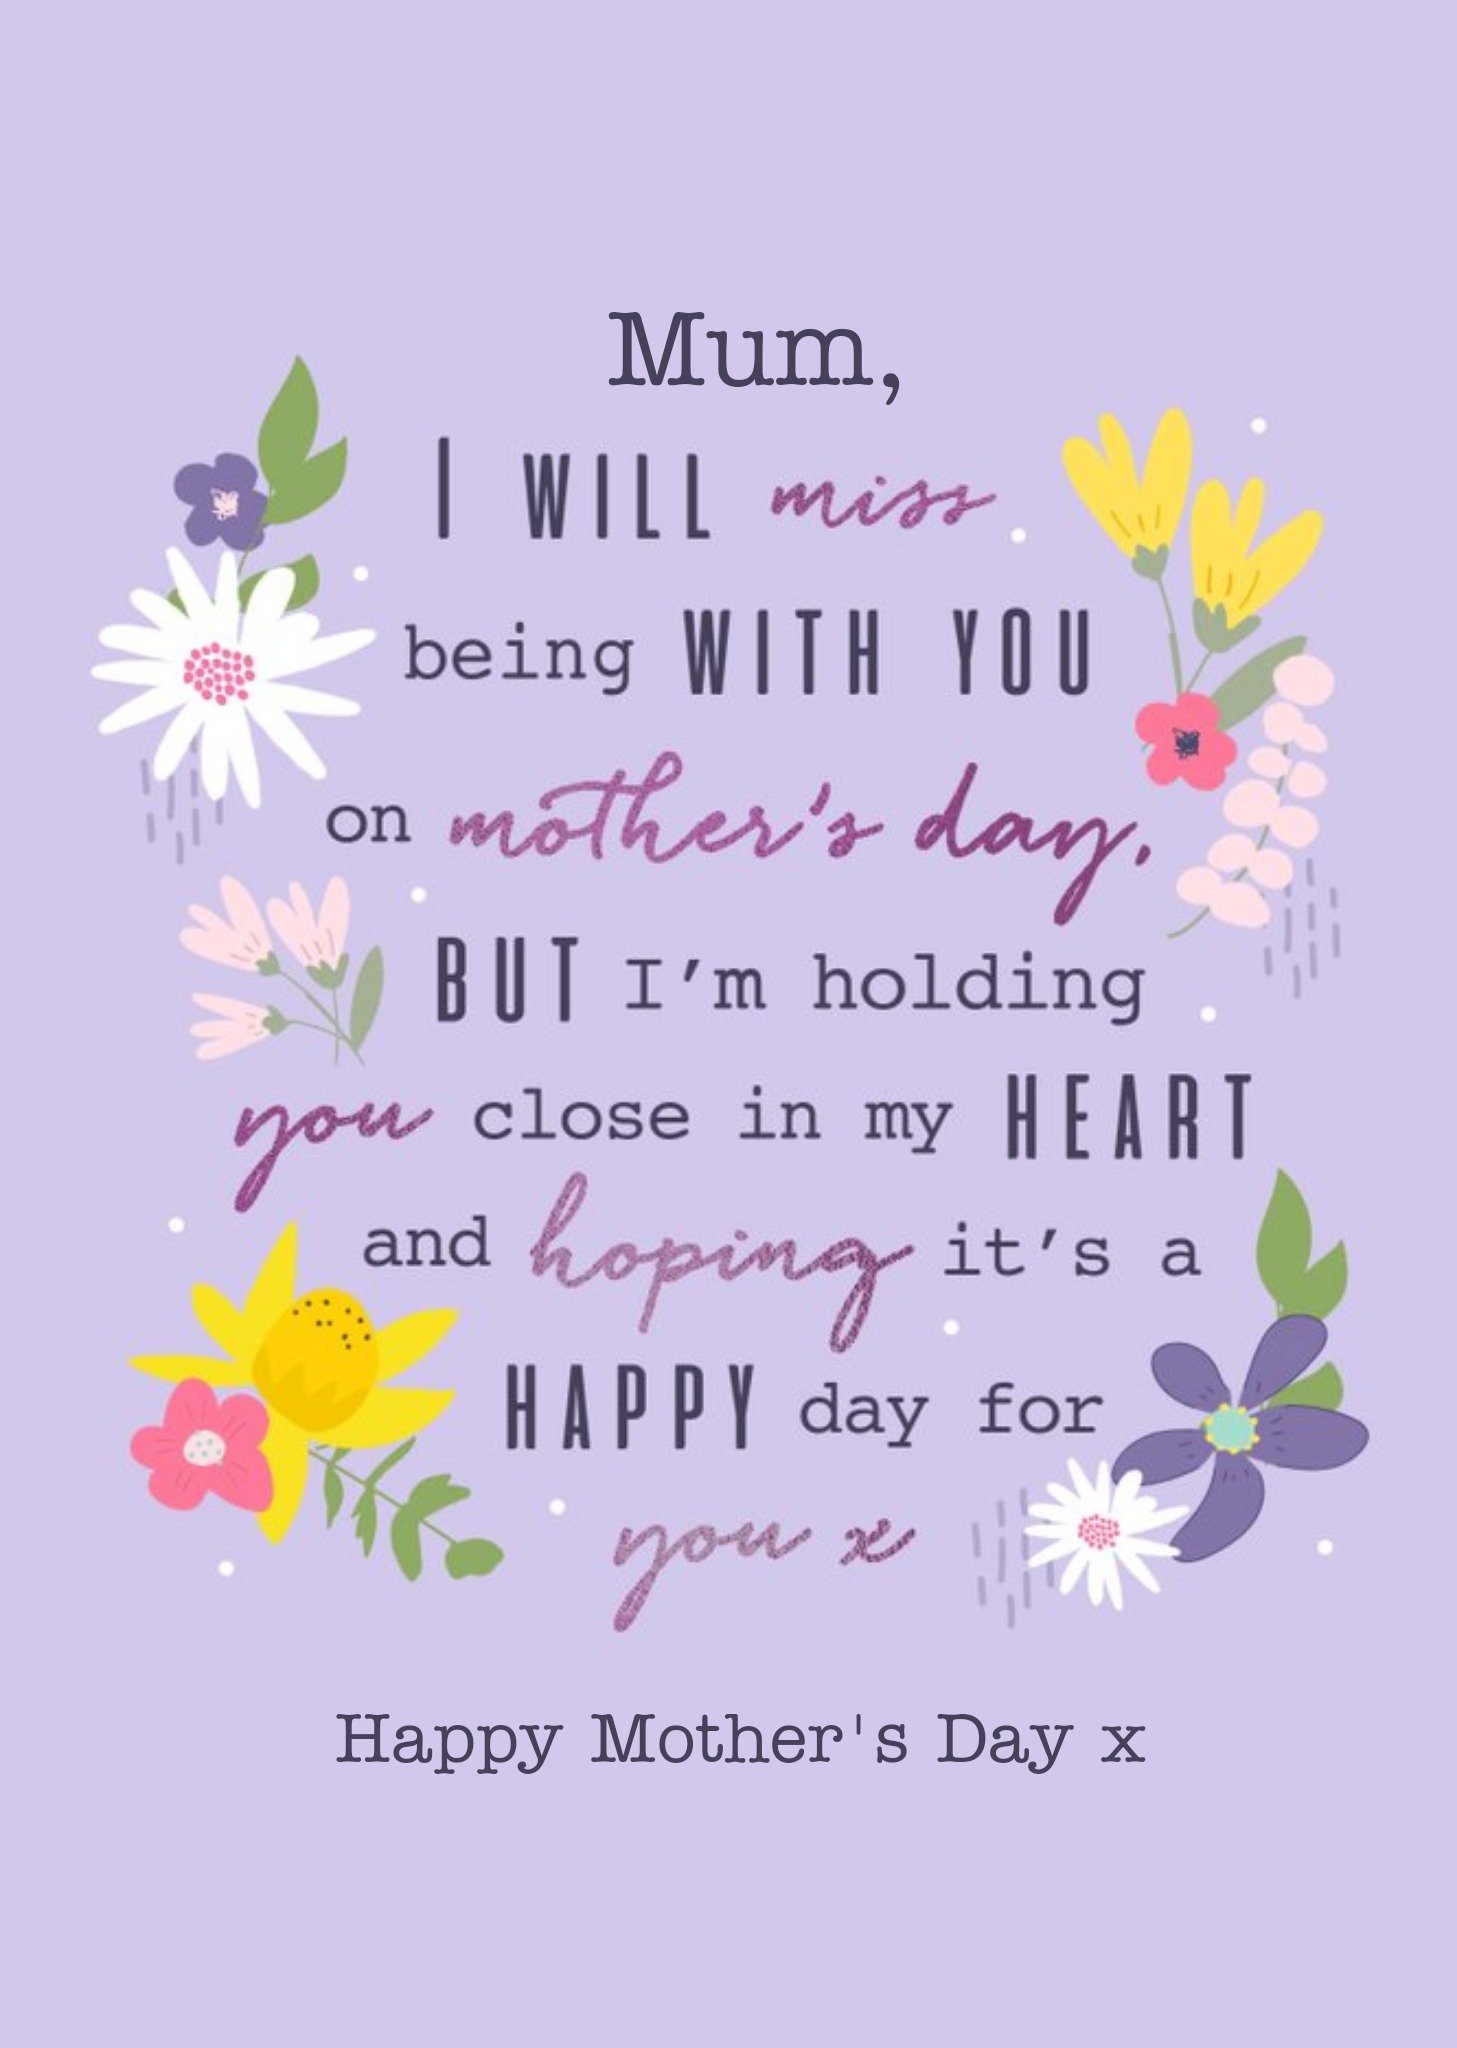 Moonpig Mumthoughtful Words Modern Floral Design Mother's Day Card Ecard